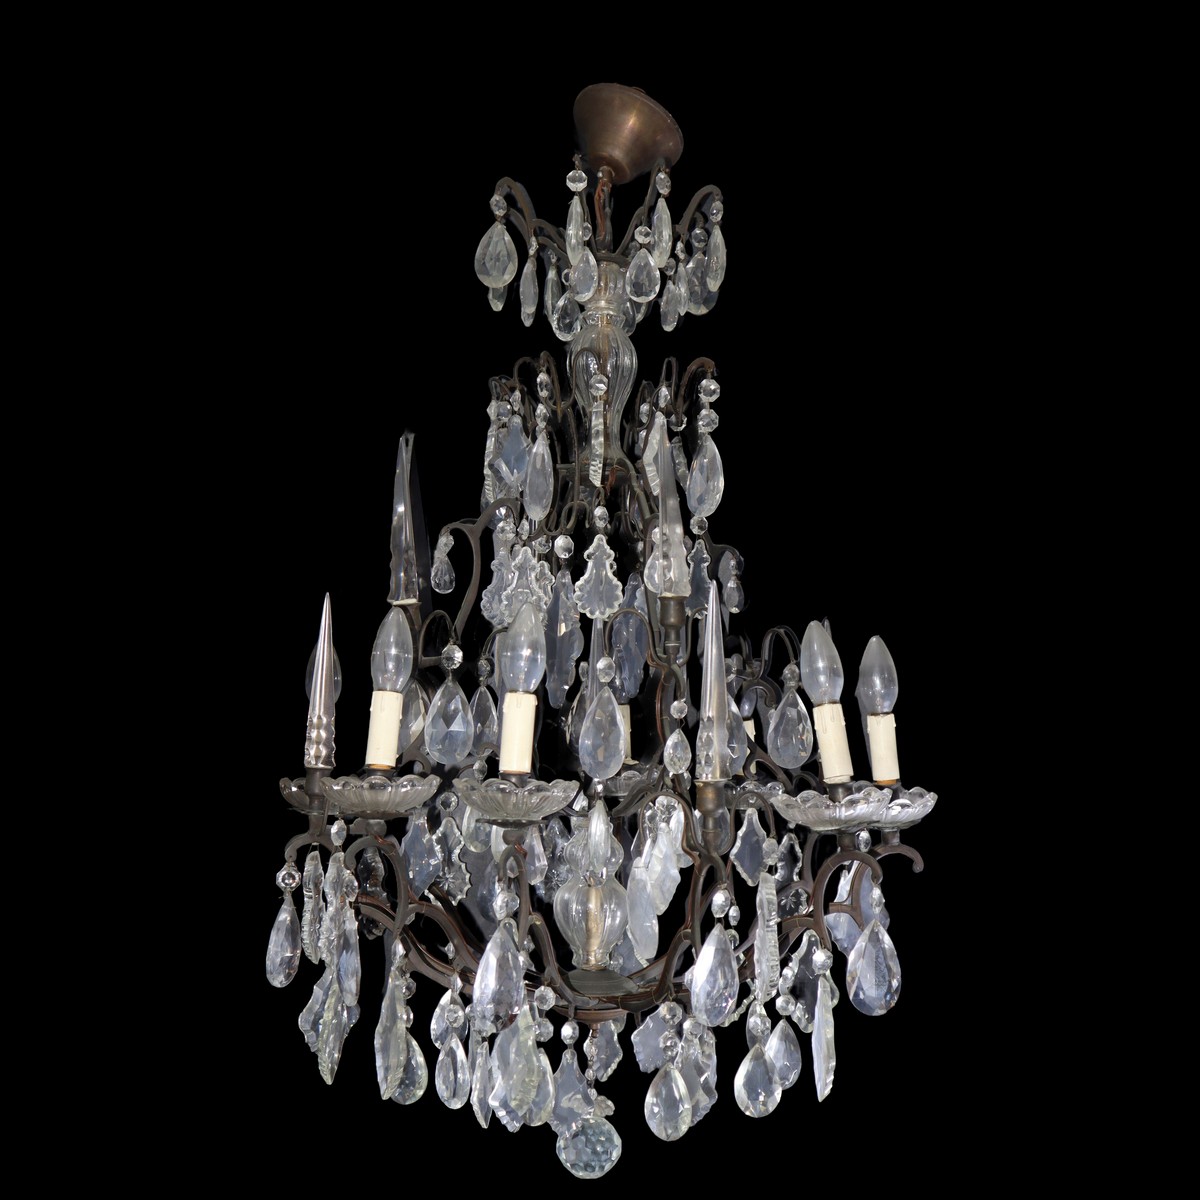 Chandelier with metal structure, hand-cut glass toasts, 8 lights, Early 20th century